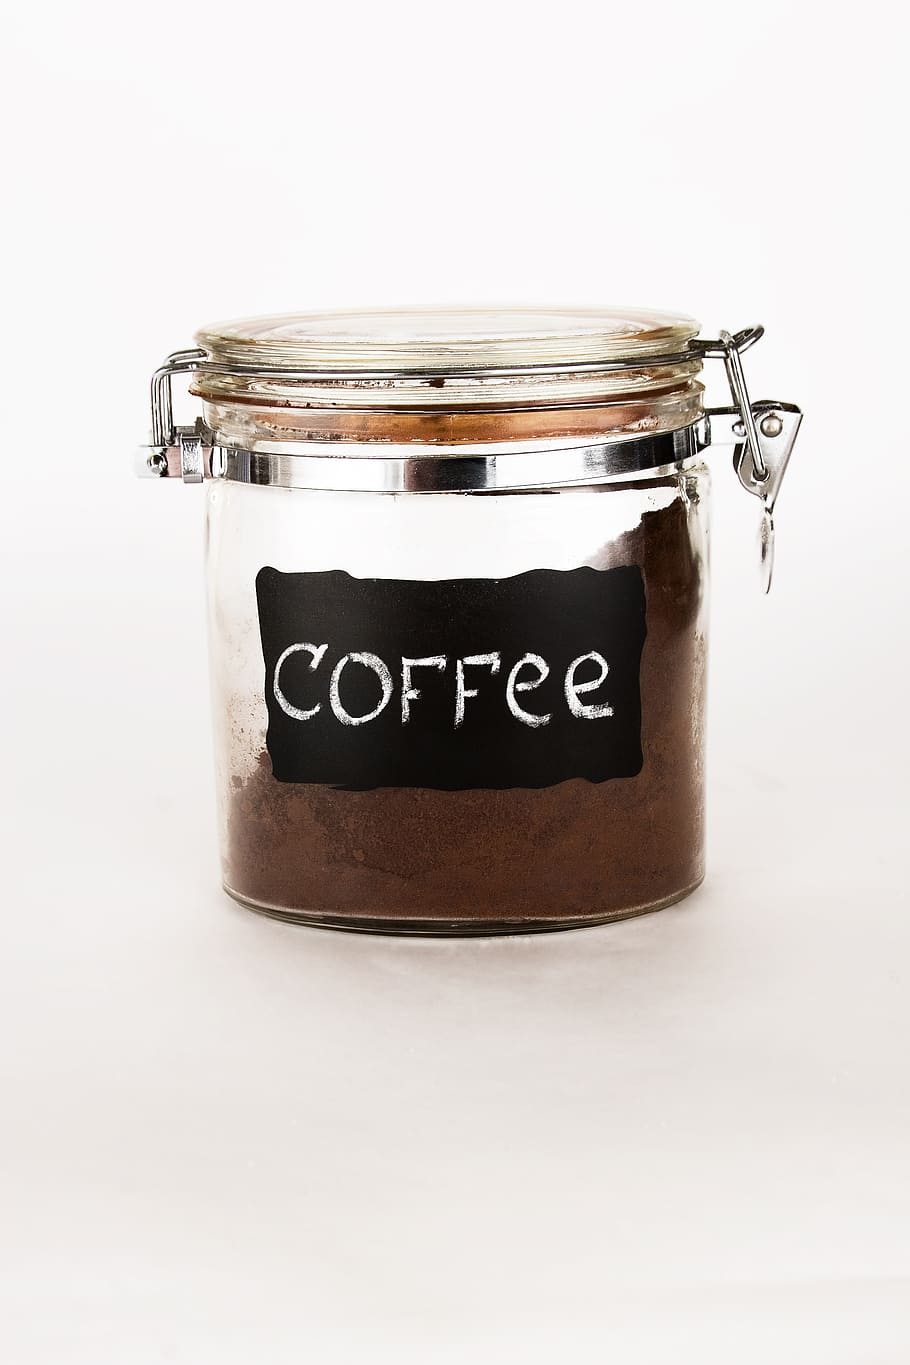 airtight canister filled with coffee powder, cappuccino, metal